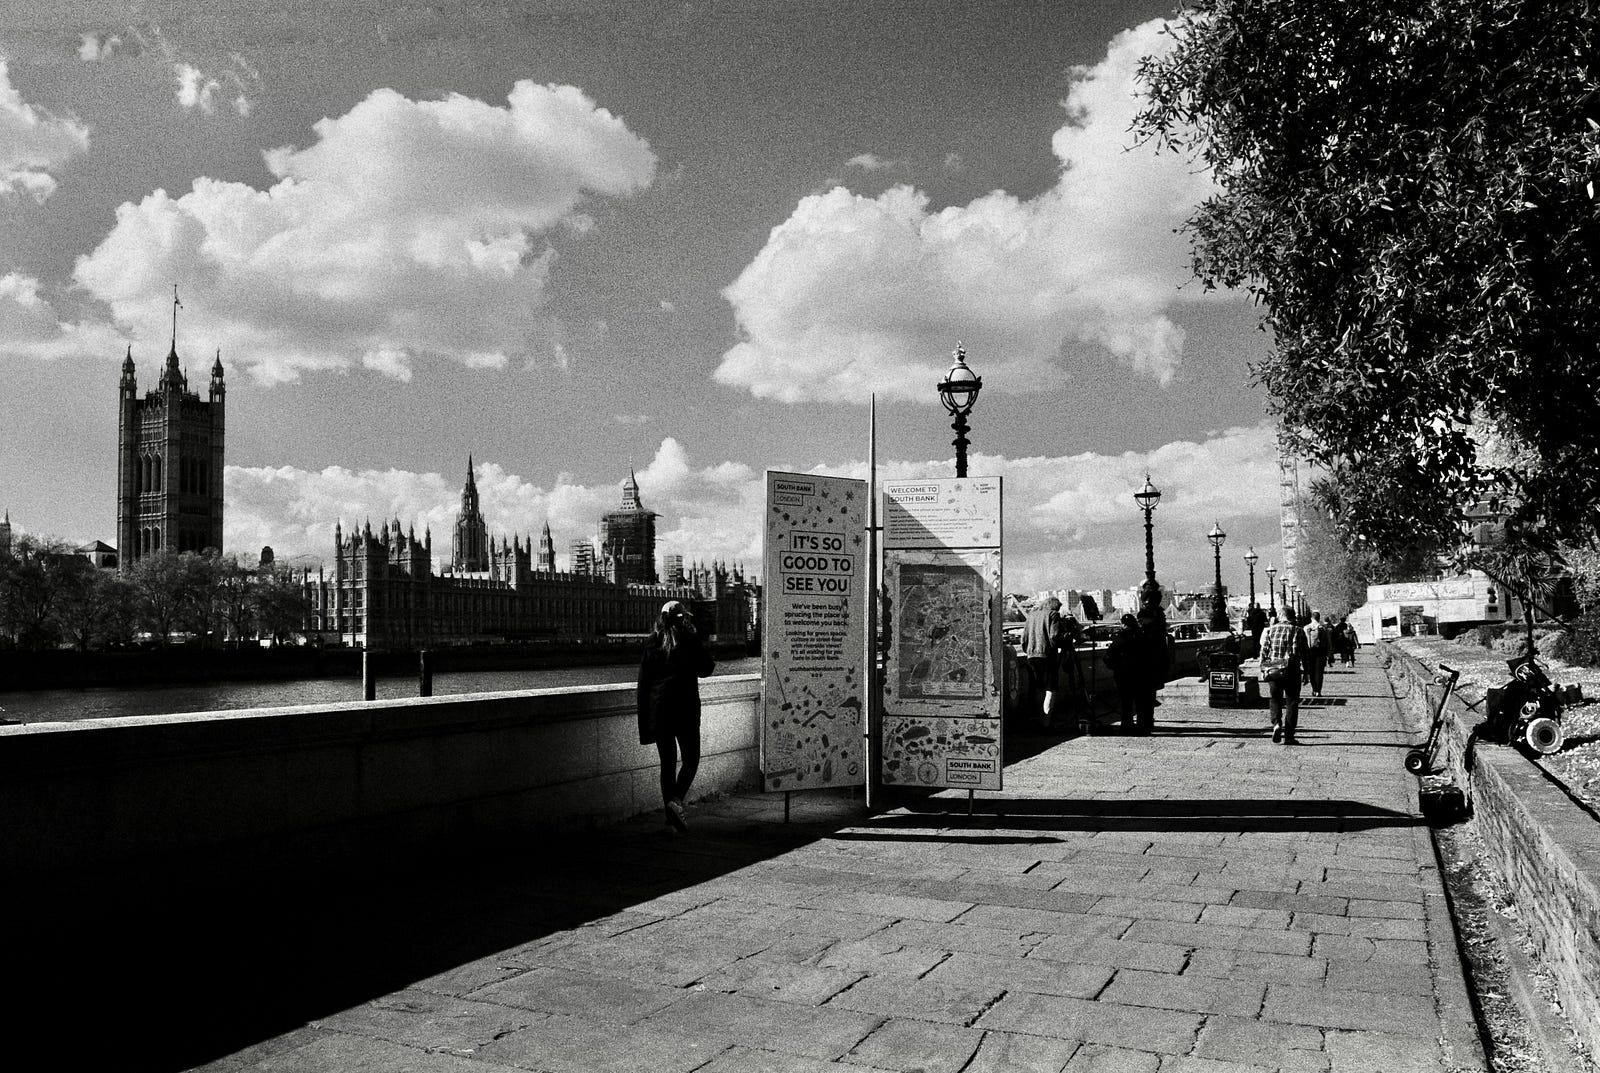 A black and white image of the South Bank at Lambeth, looking towards the Houses of Parliament across the river. People are walking up and down the promenade.